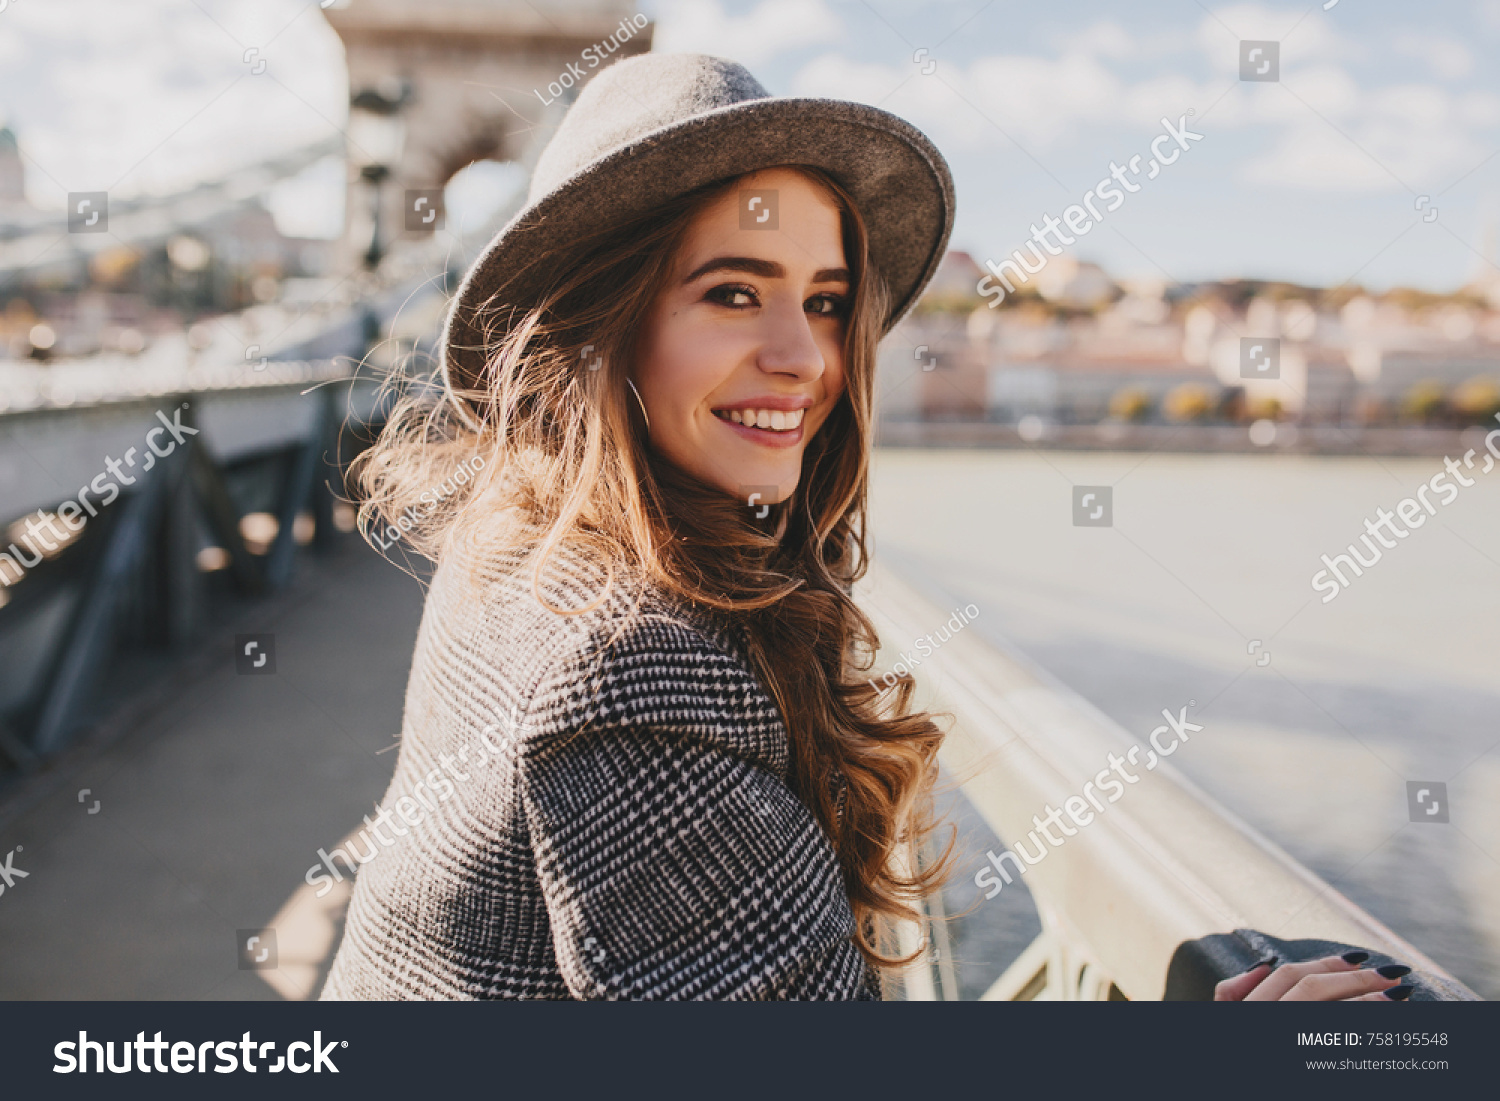 Outdoor photo of romantic european woman with curly hairstyle spending time outdoor, exploring european city. Graceful young lady in gray coat and hat enjoying views on embankment. #758195548